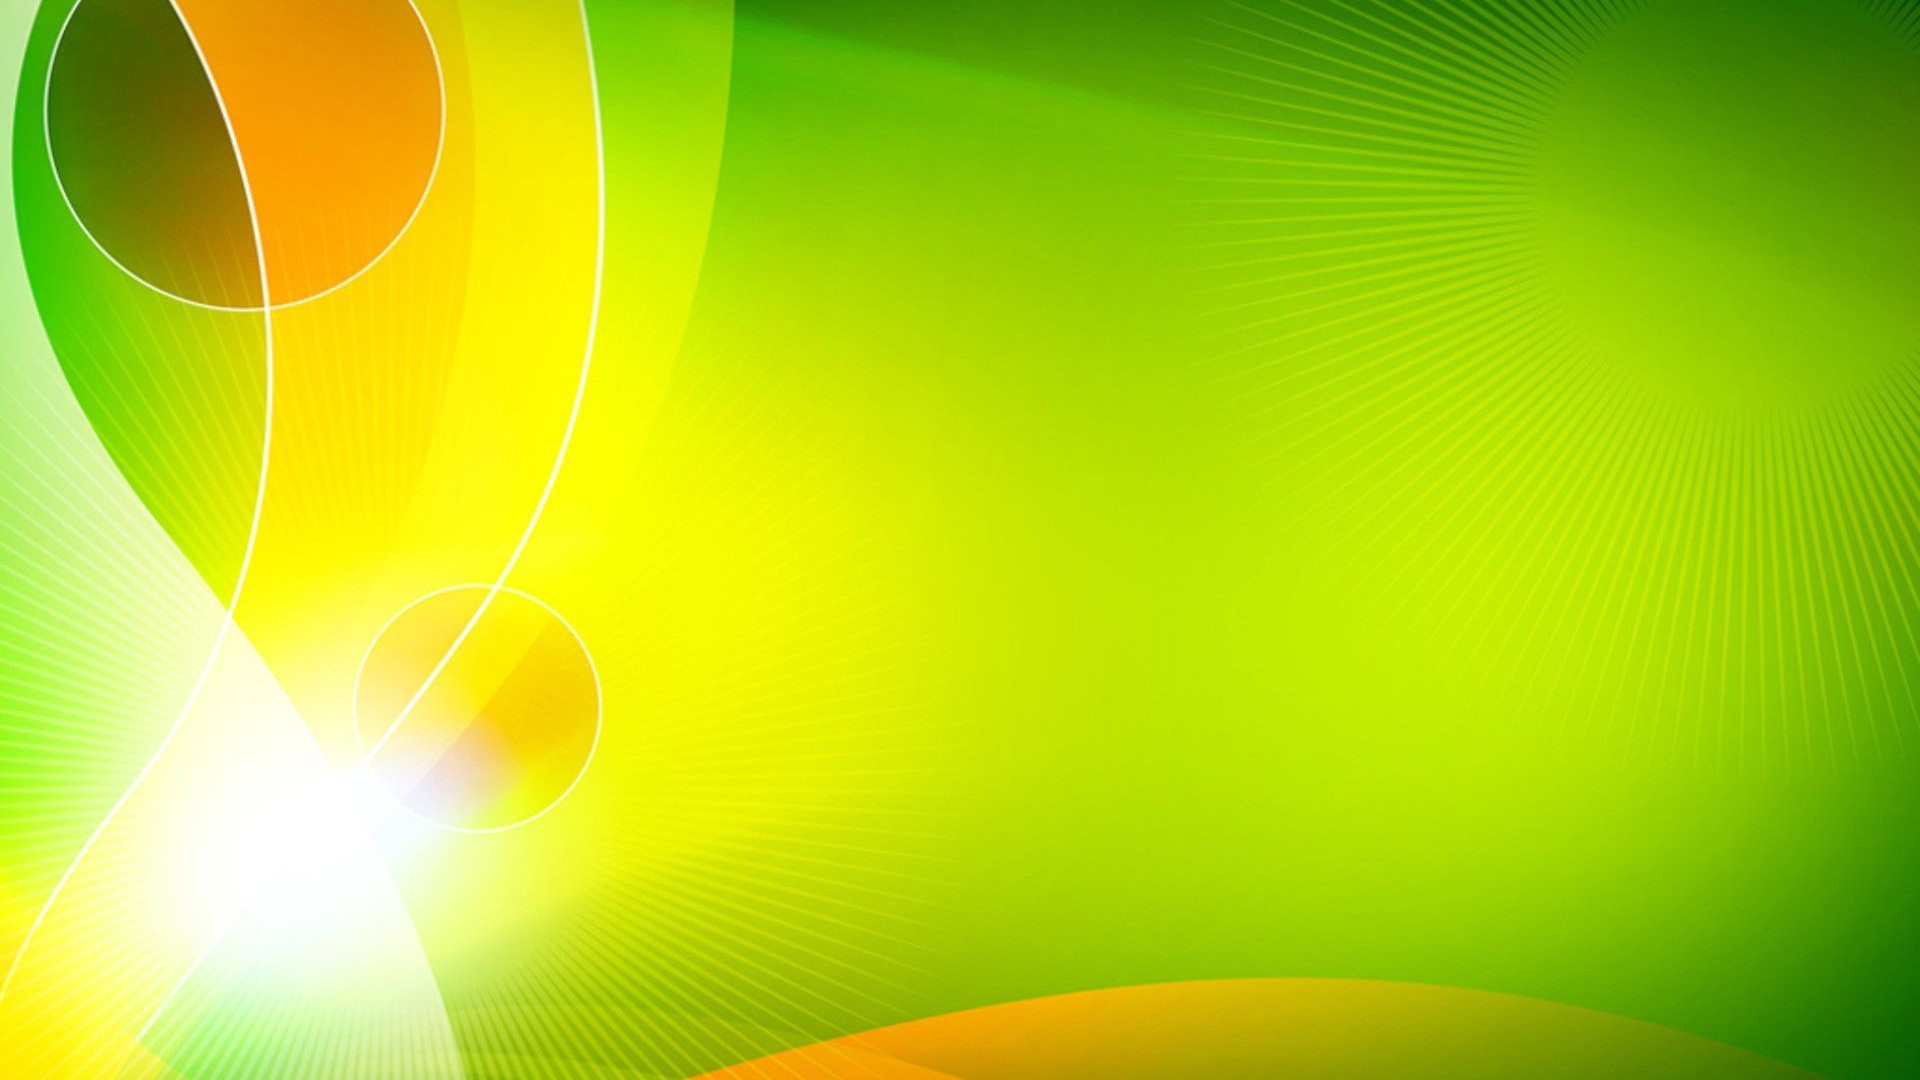 Wallpaper Lime Green Desktop With Image Resolution - Green And Orange Background - HD Wallpaper 